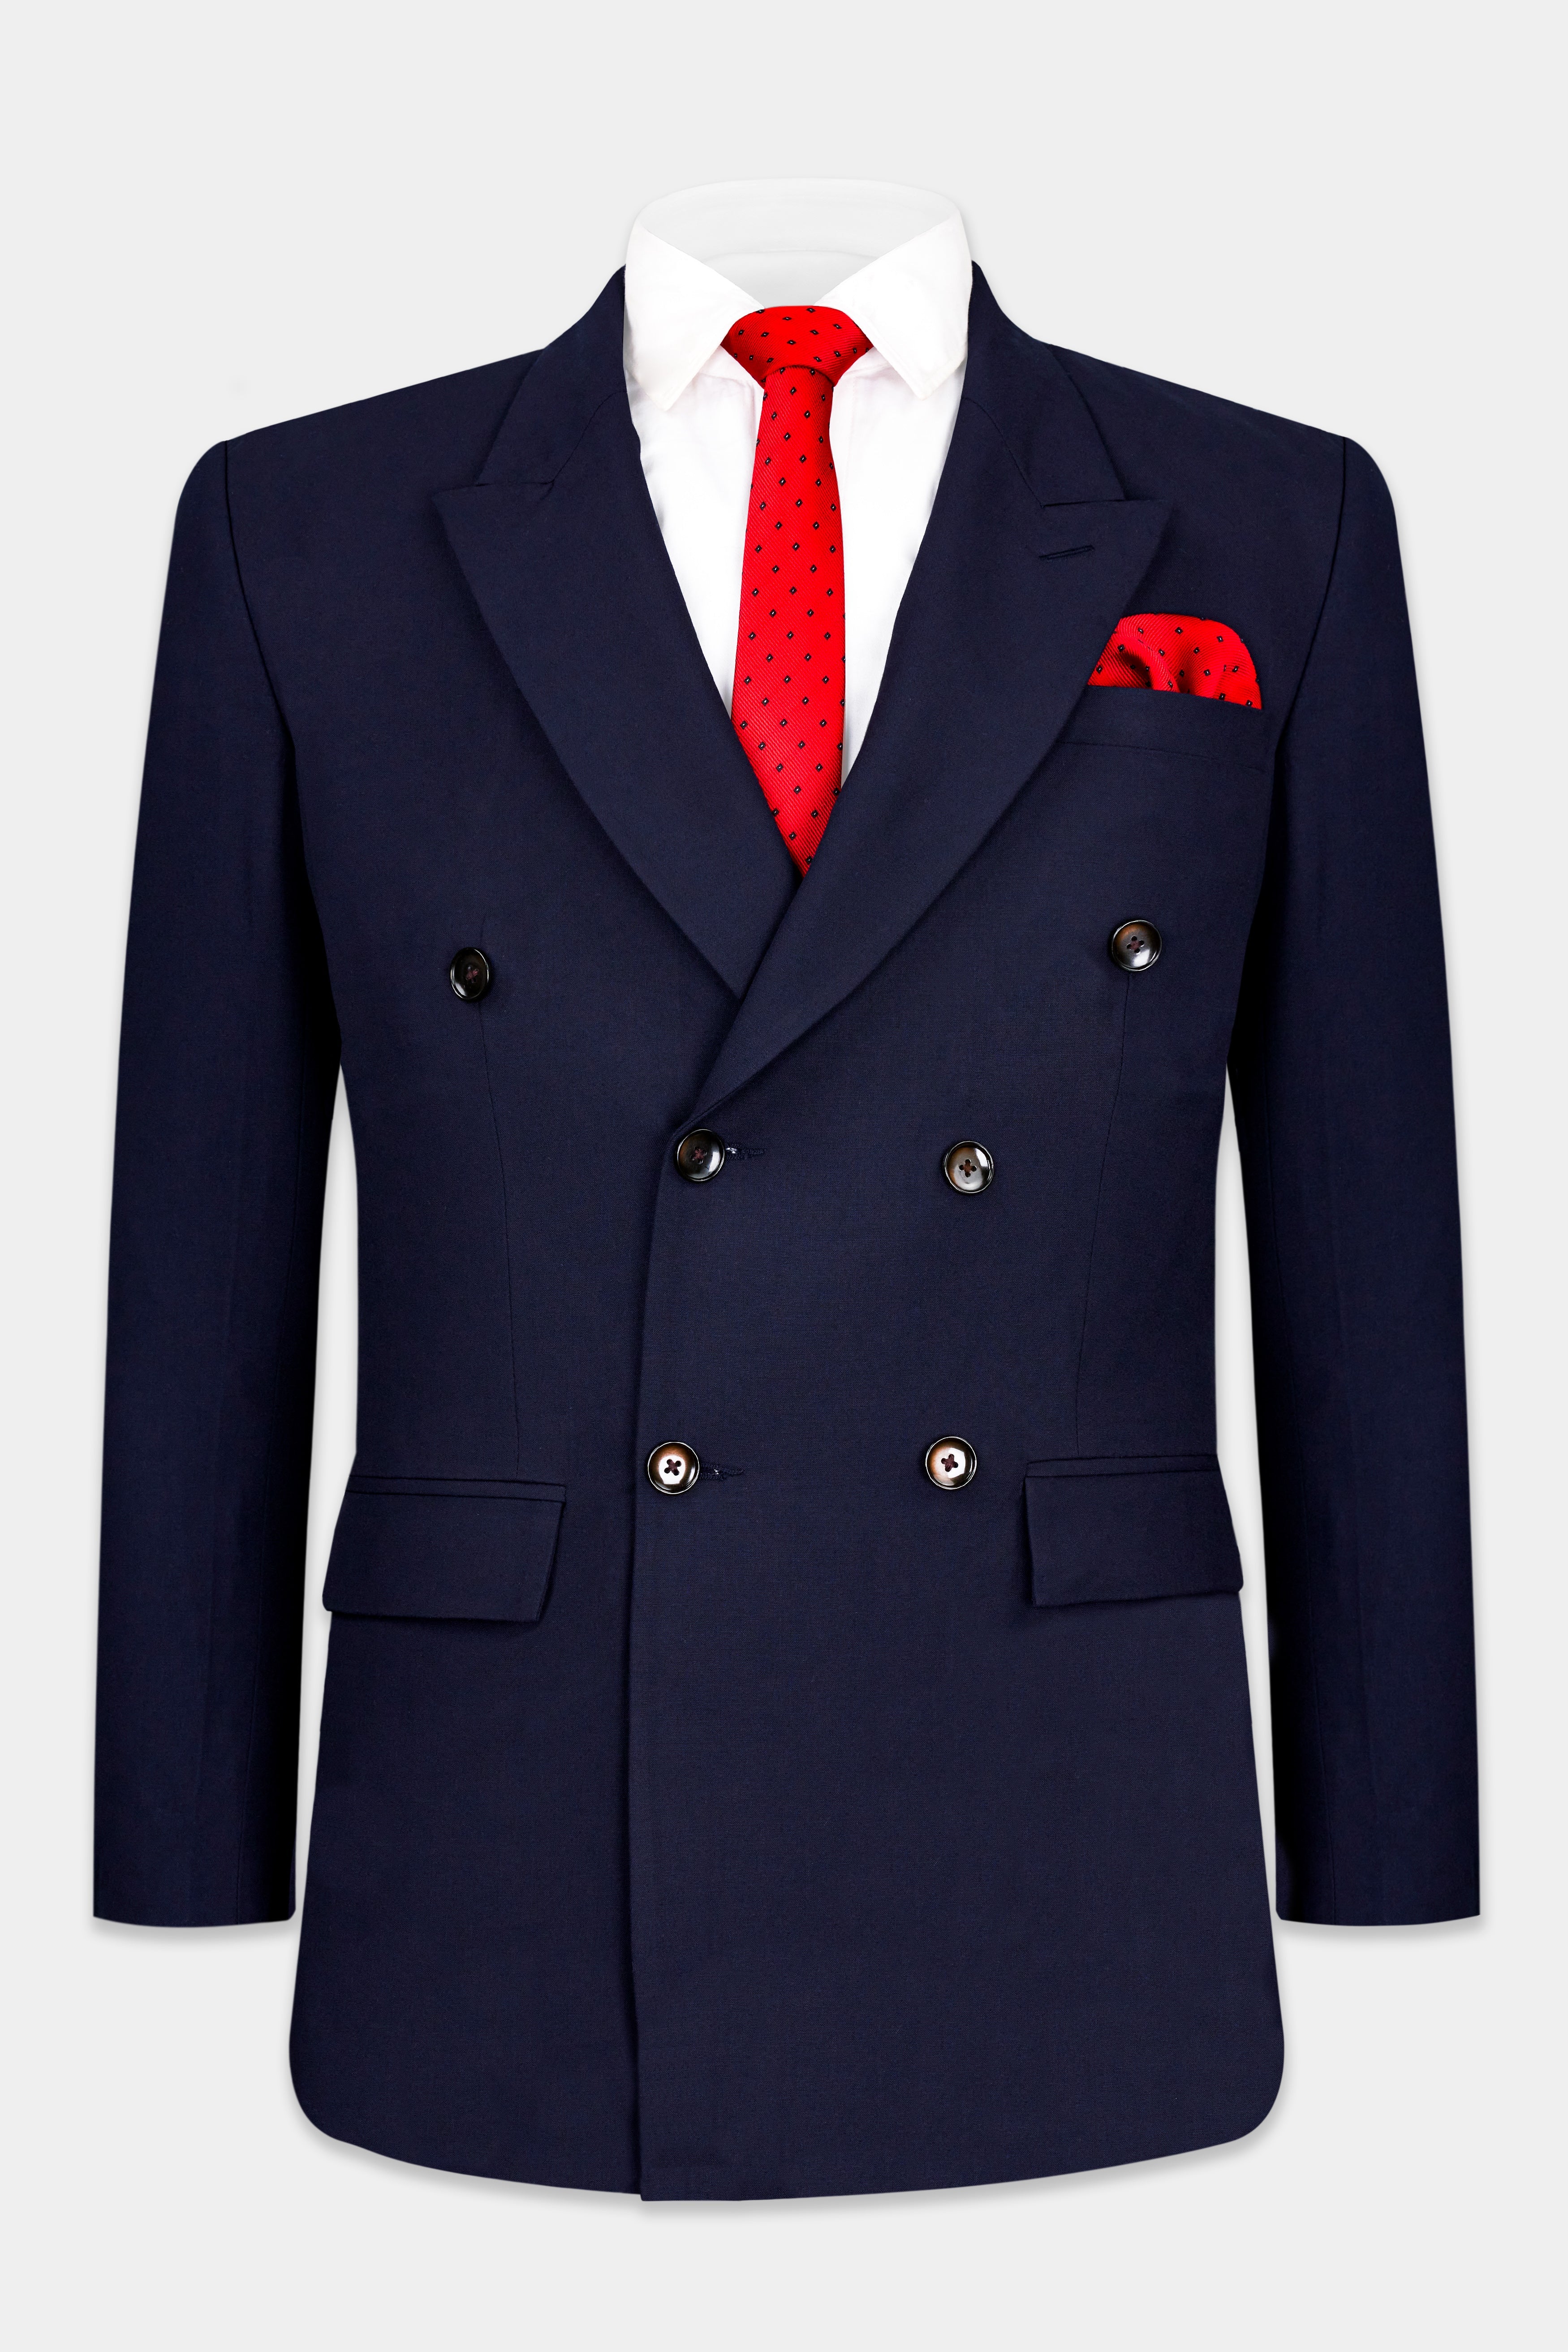 Bleached Cedar Blue Stretchable Wool rich Double Breasted traveler Suit ST2758-DB-36,ST2758-DB-38,ST2758-DB-40,ST2758-DB-42,ST2758-DB-44,ST2758-DB-46,ST2758-DB-48,ST2758-DB-50,ST2758-DB-52,ST2758-DB-54,ST2758-DB-56,ST2758-DB-58,ST2758-DB-60